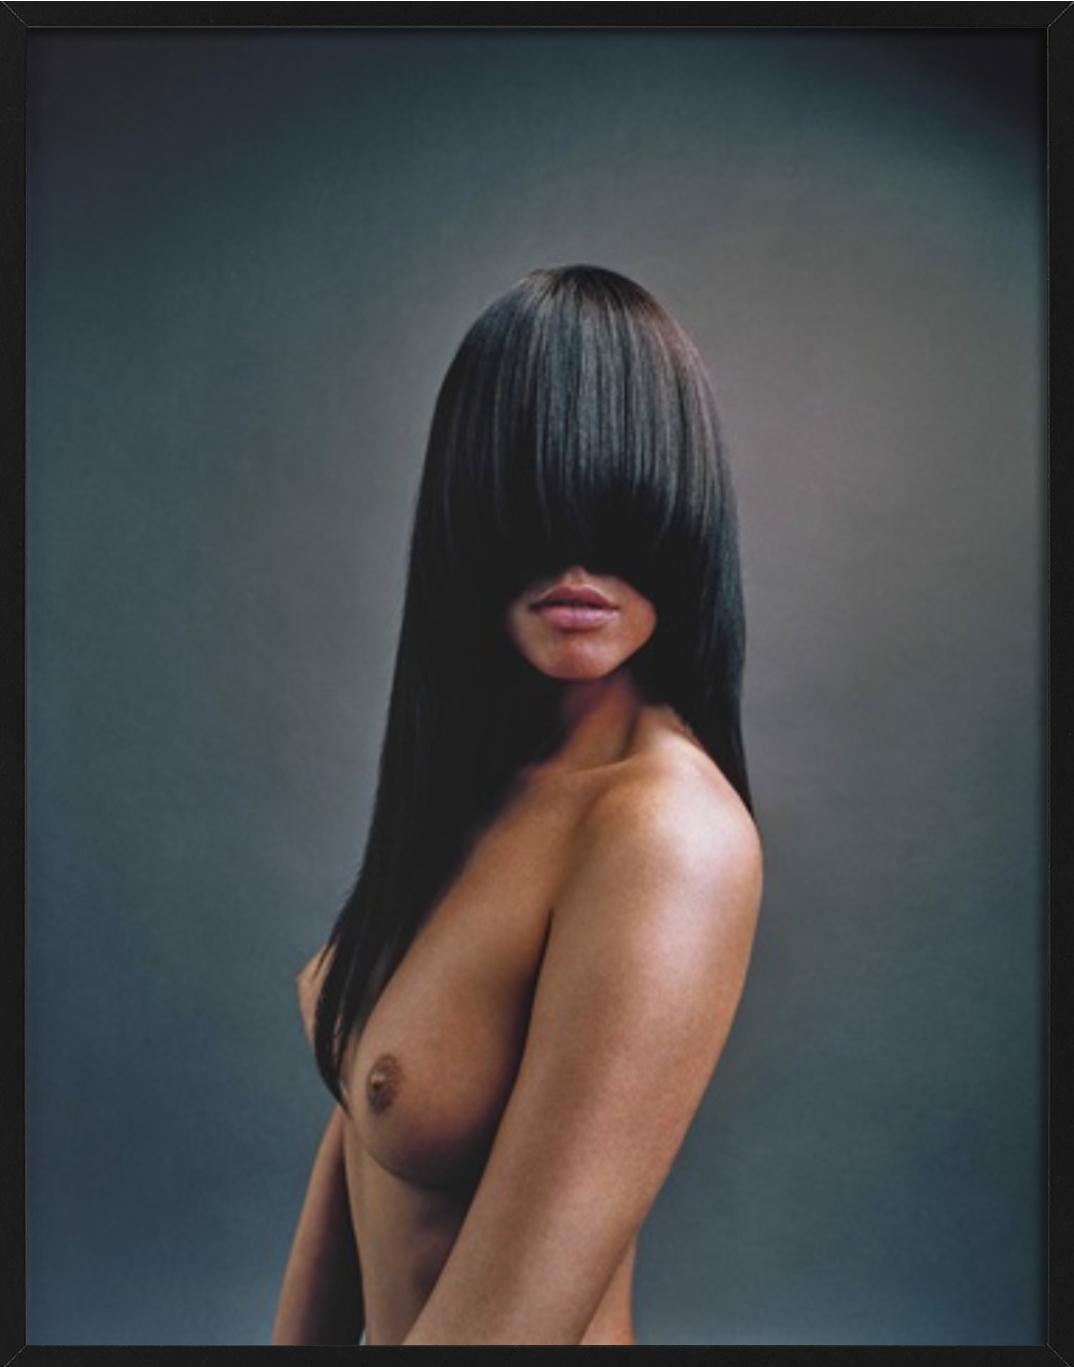 Irina - nude portrait with long hair, fine art photography, 2005 - Black Color Photograph by Andreas H. Bitesnich